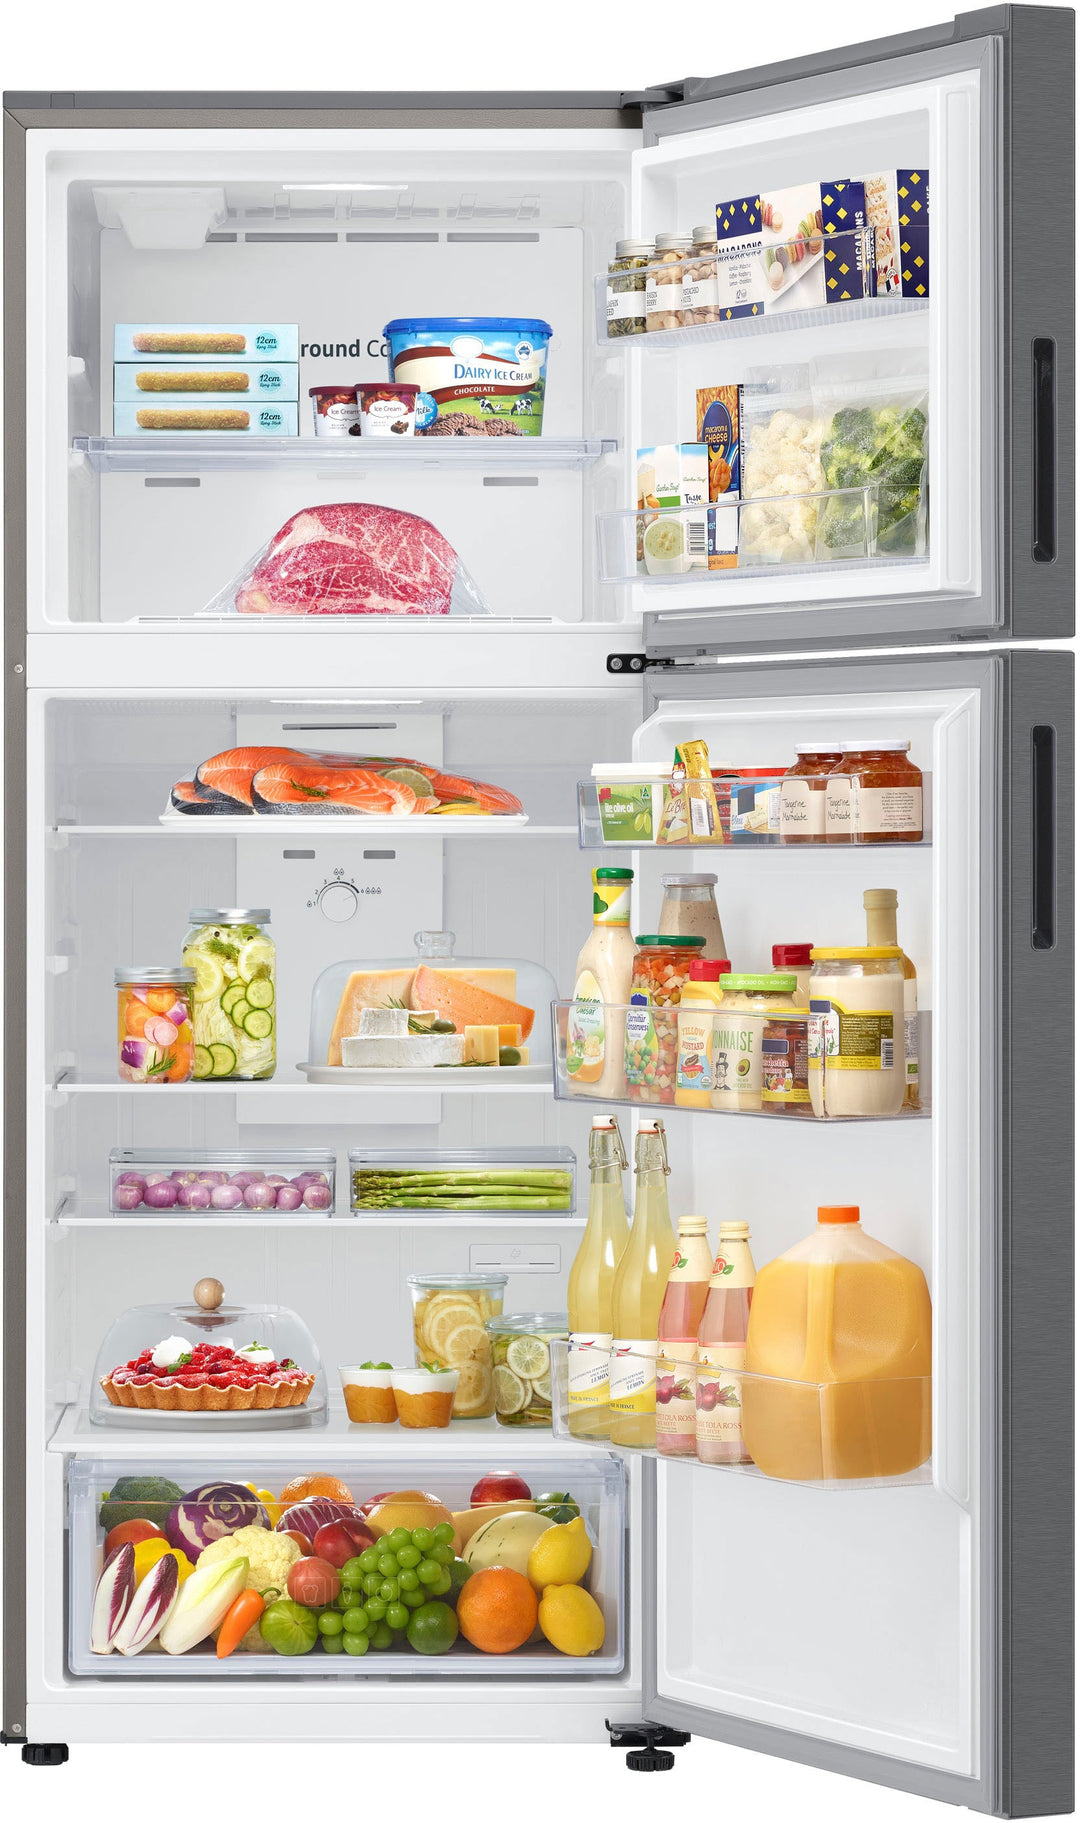 Samsung - 15.6 cu. ft. Top Freezer Refrigerator with All-Around Cooling - Stainless steel_2